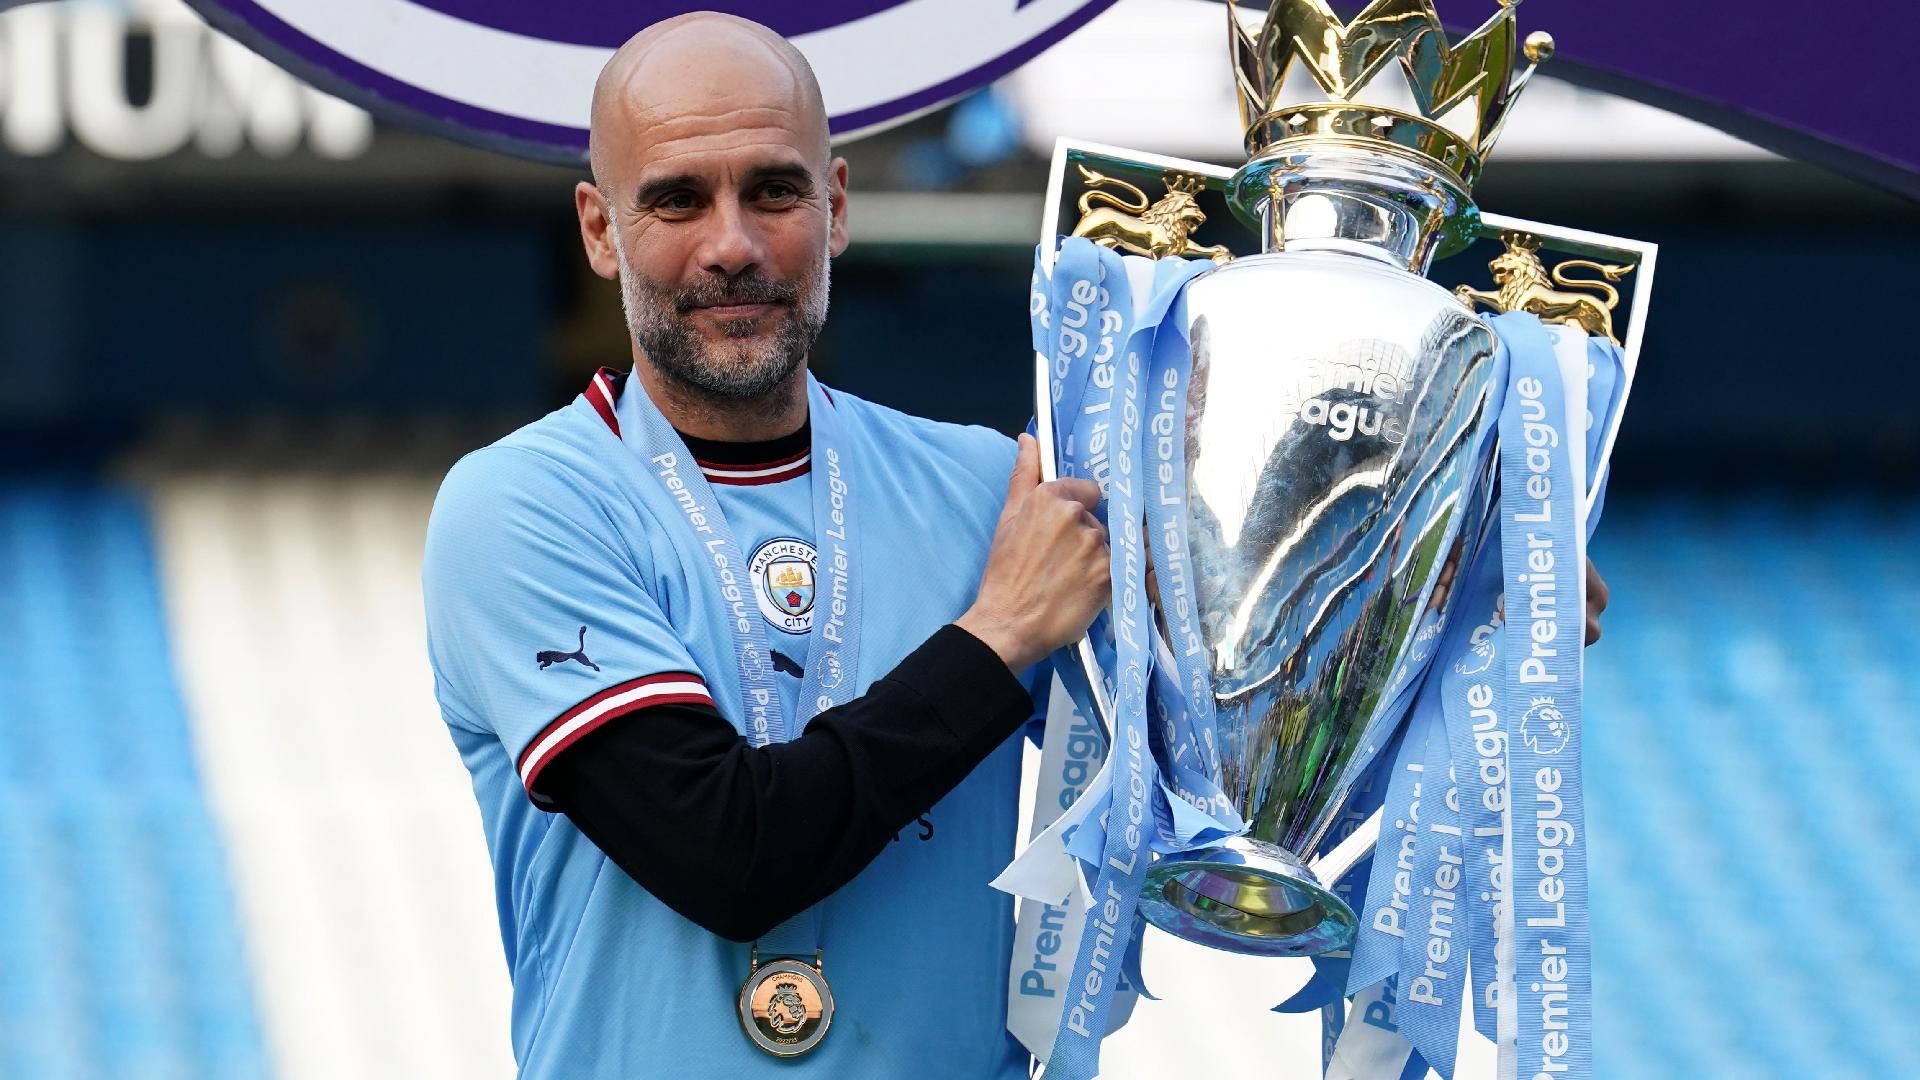 Pep Guardiola: I feel Manchester City are going to win the Premier League again